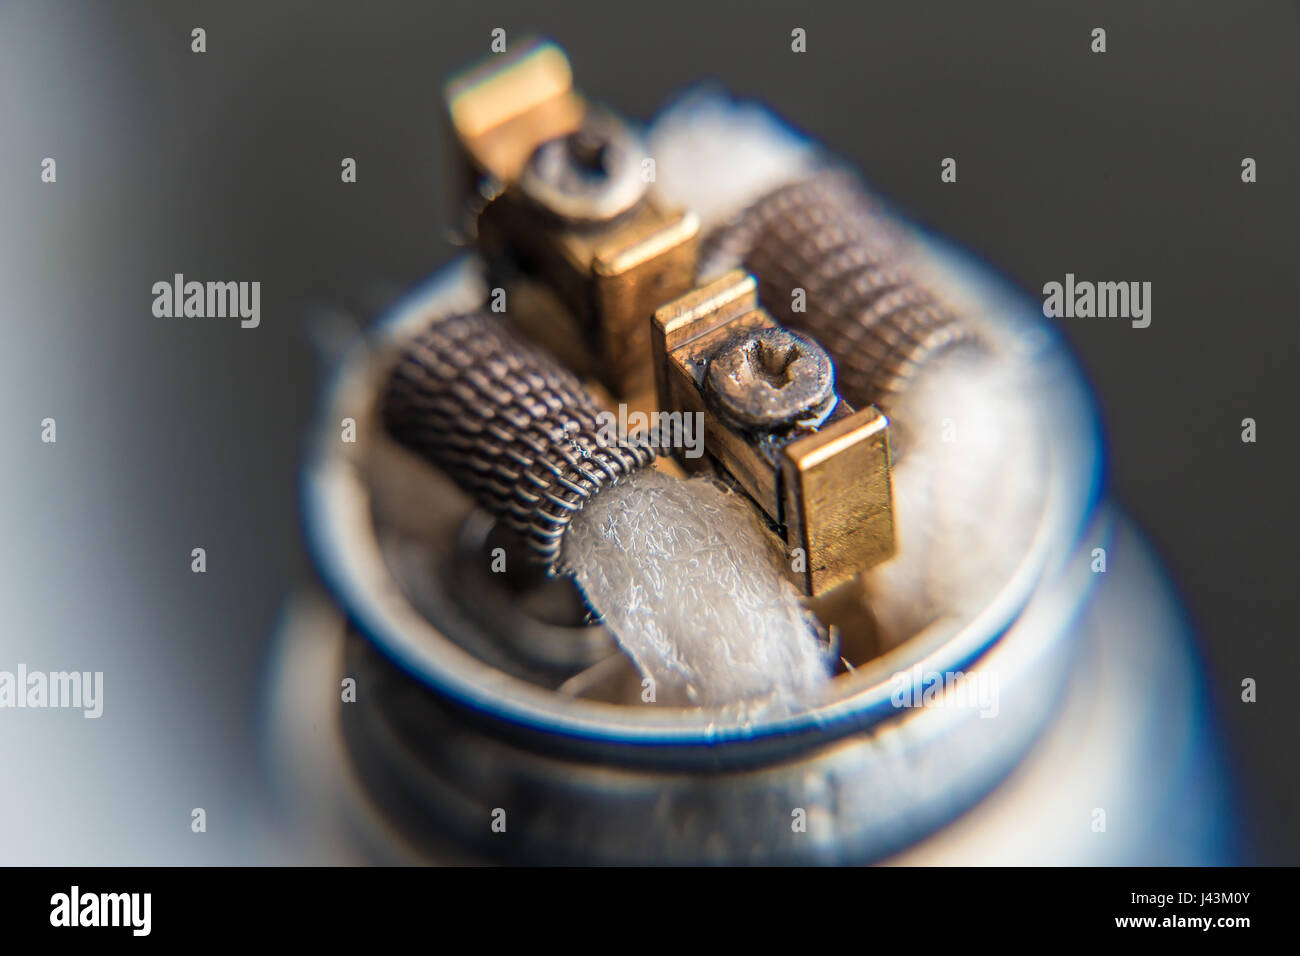 DIY RDA Dripper Coils with cotton stripes Stock Photo